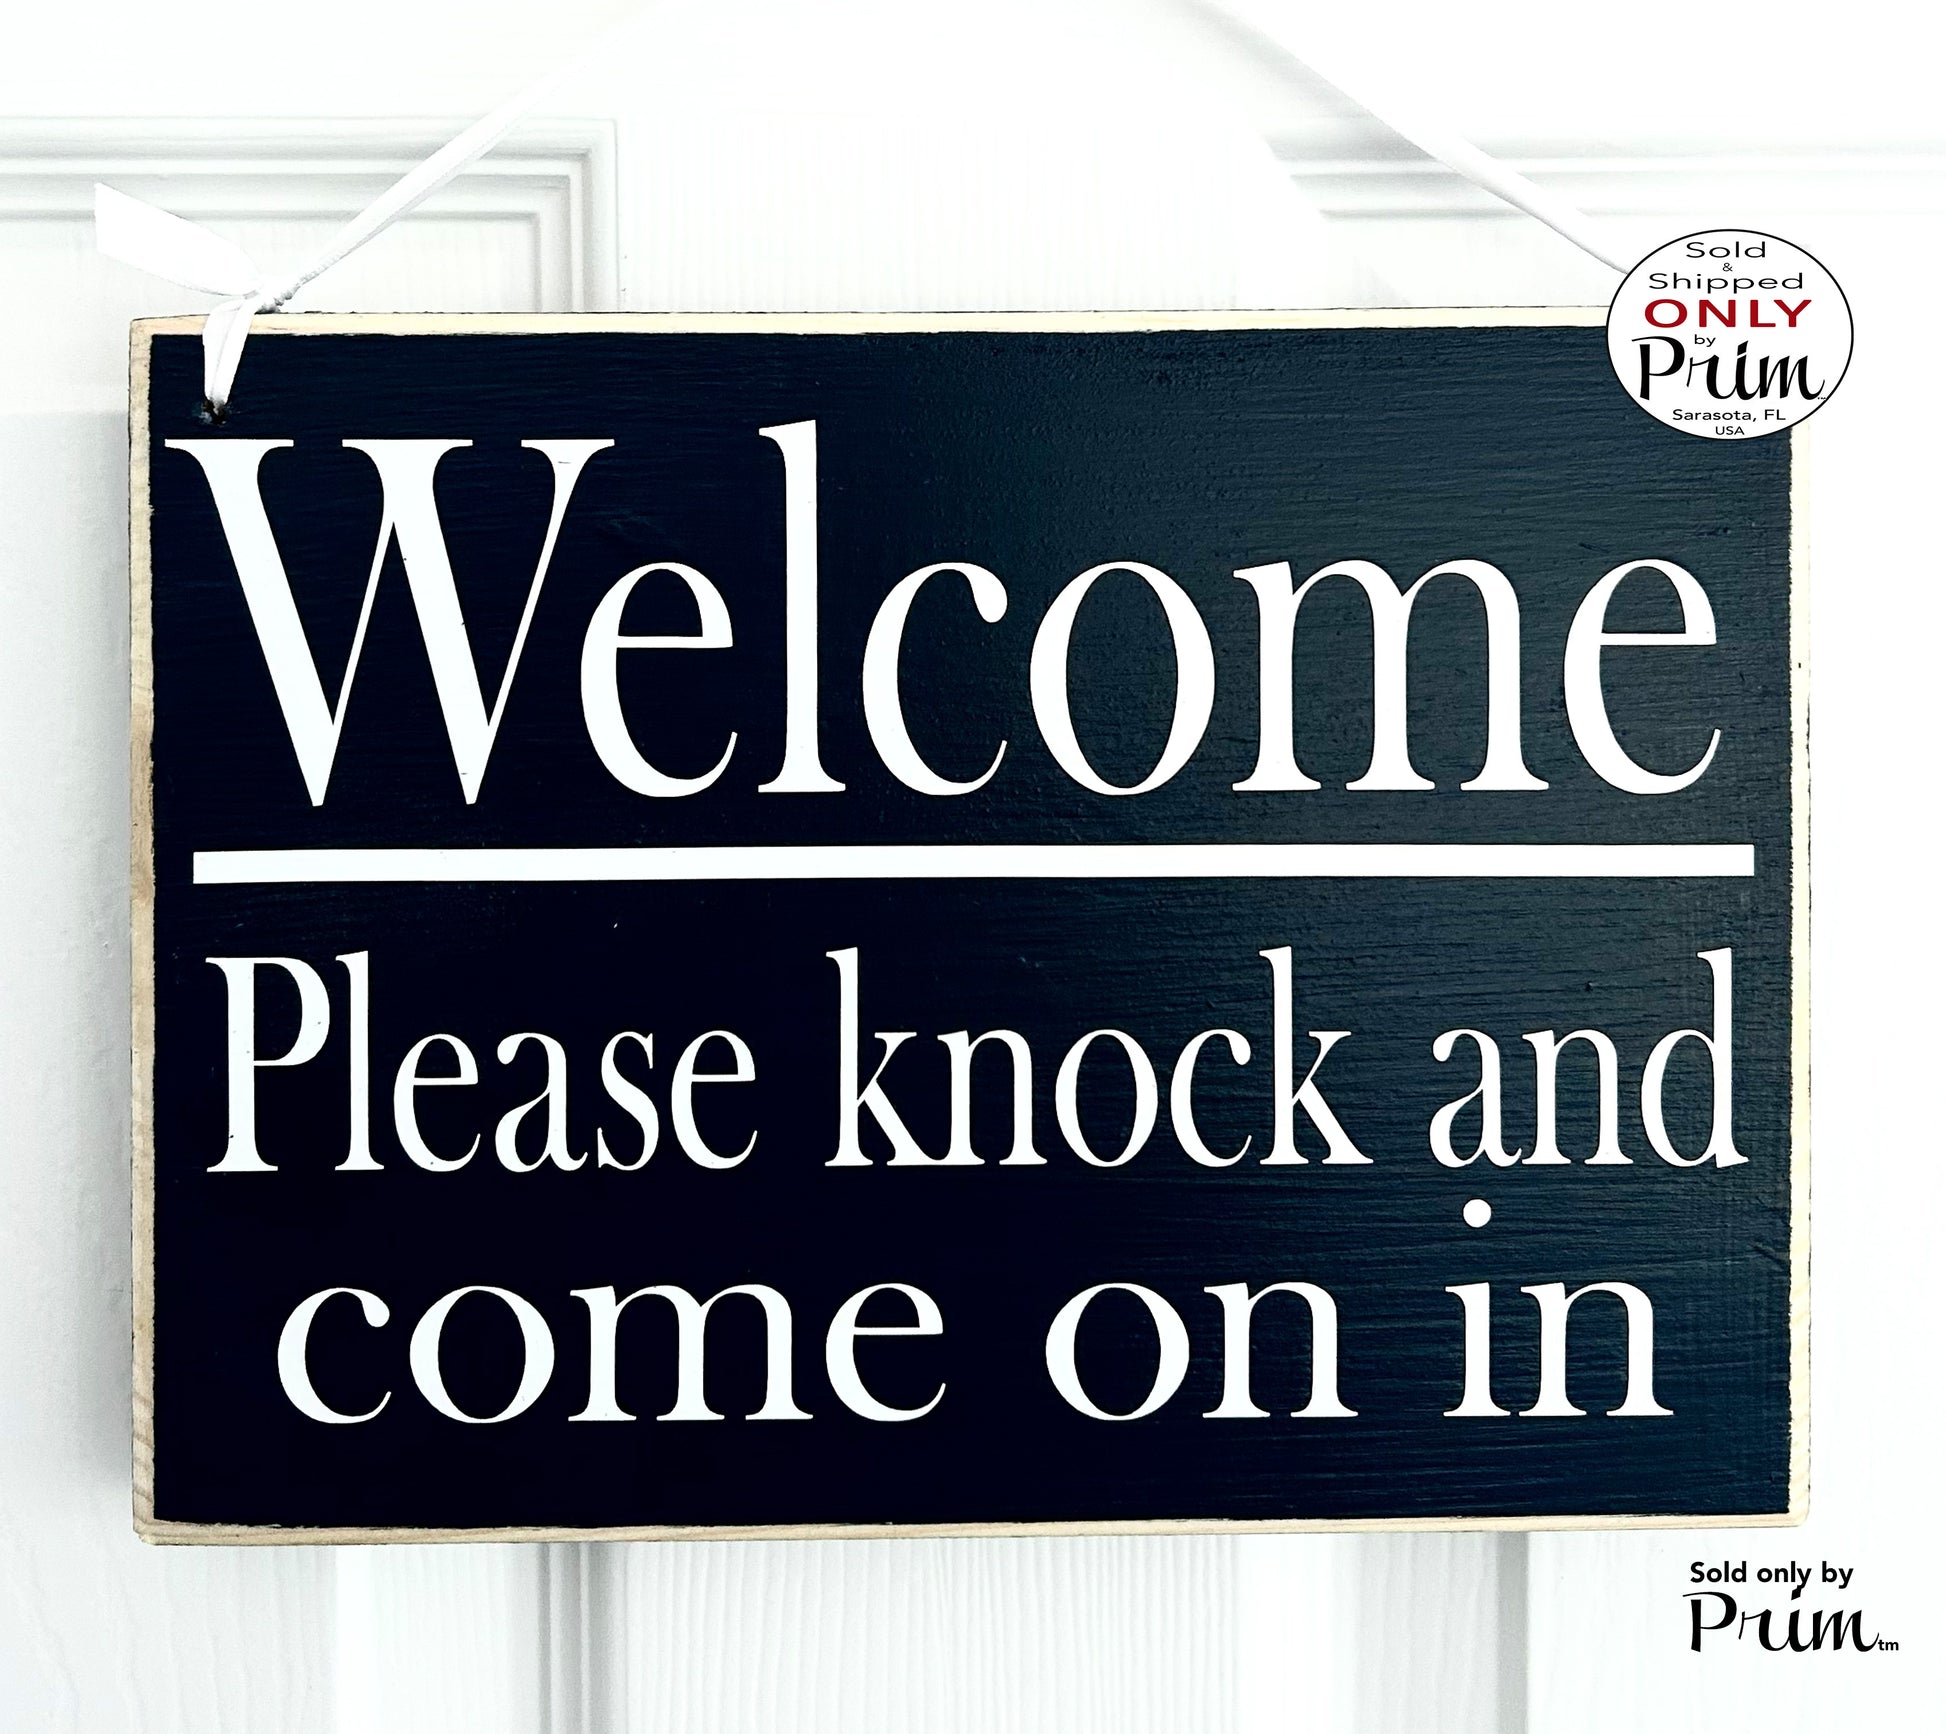 Designs by Prim 10x8 Welcome Please Knock and Come In Custom Wood Sign Have a Seat Patient Client Waiting Area Be With You Shortly Office Plaque